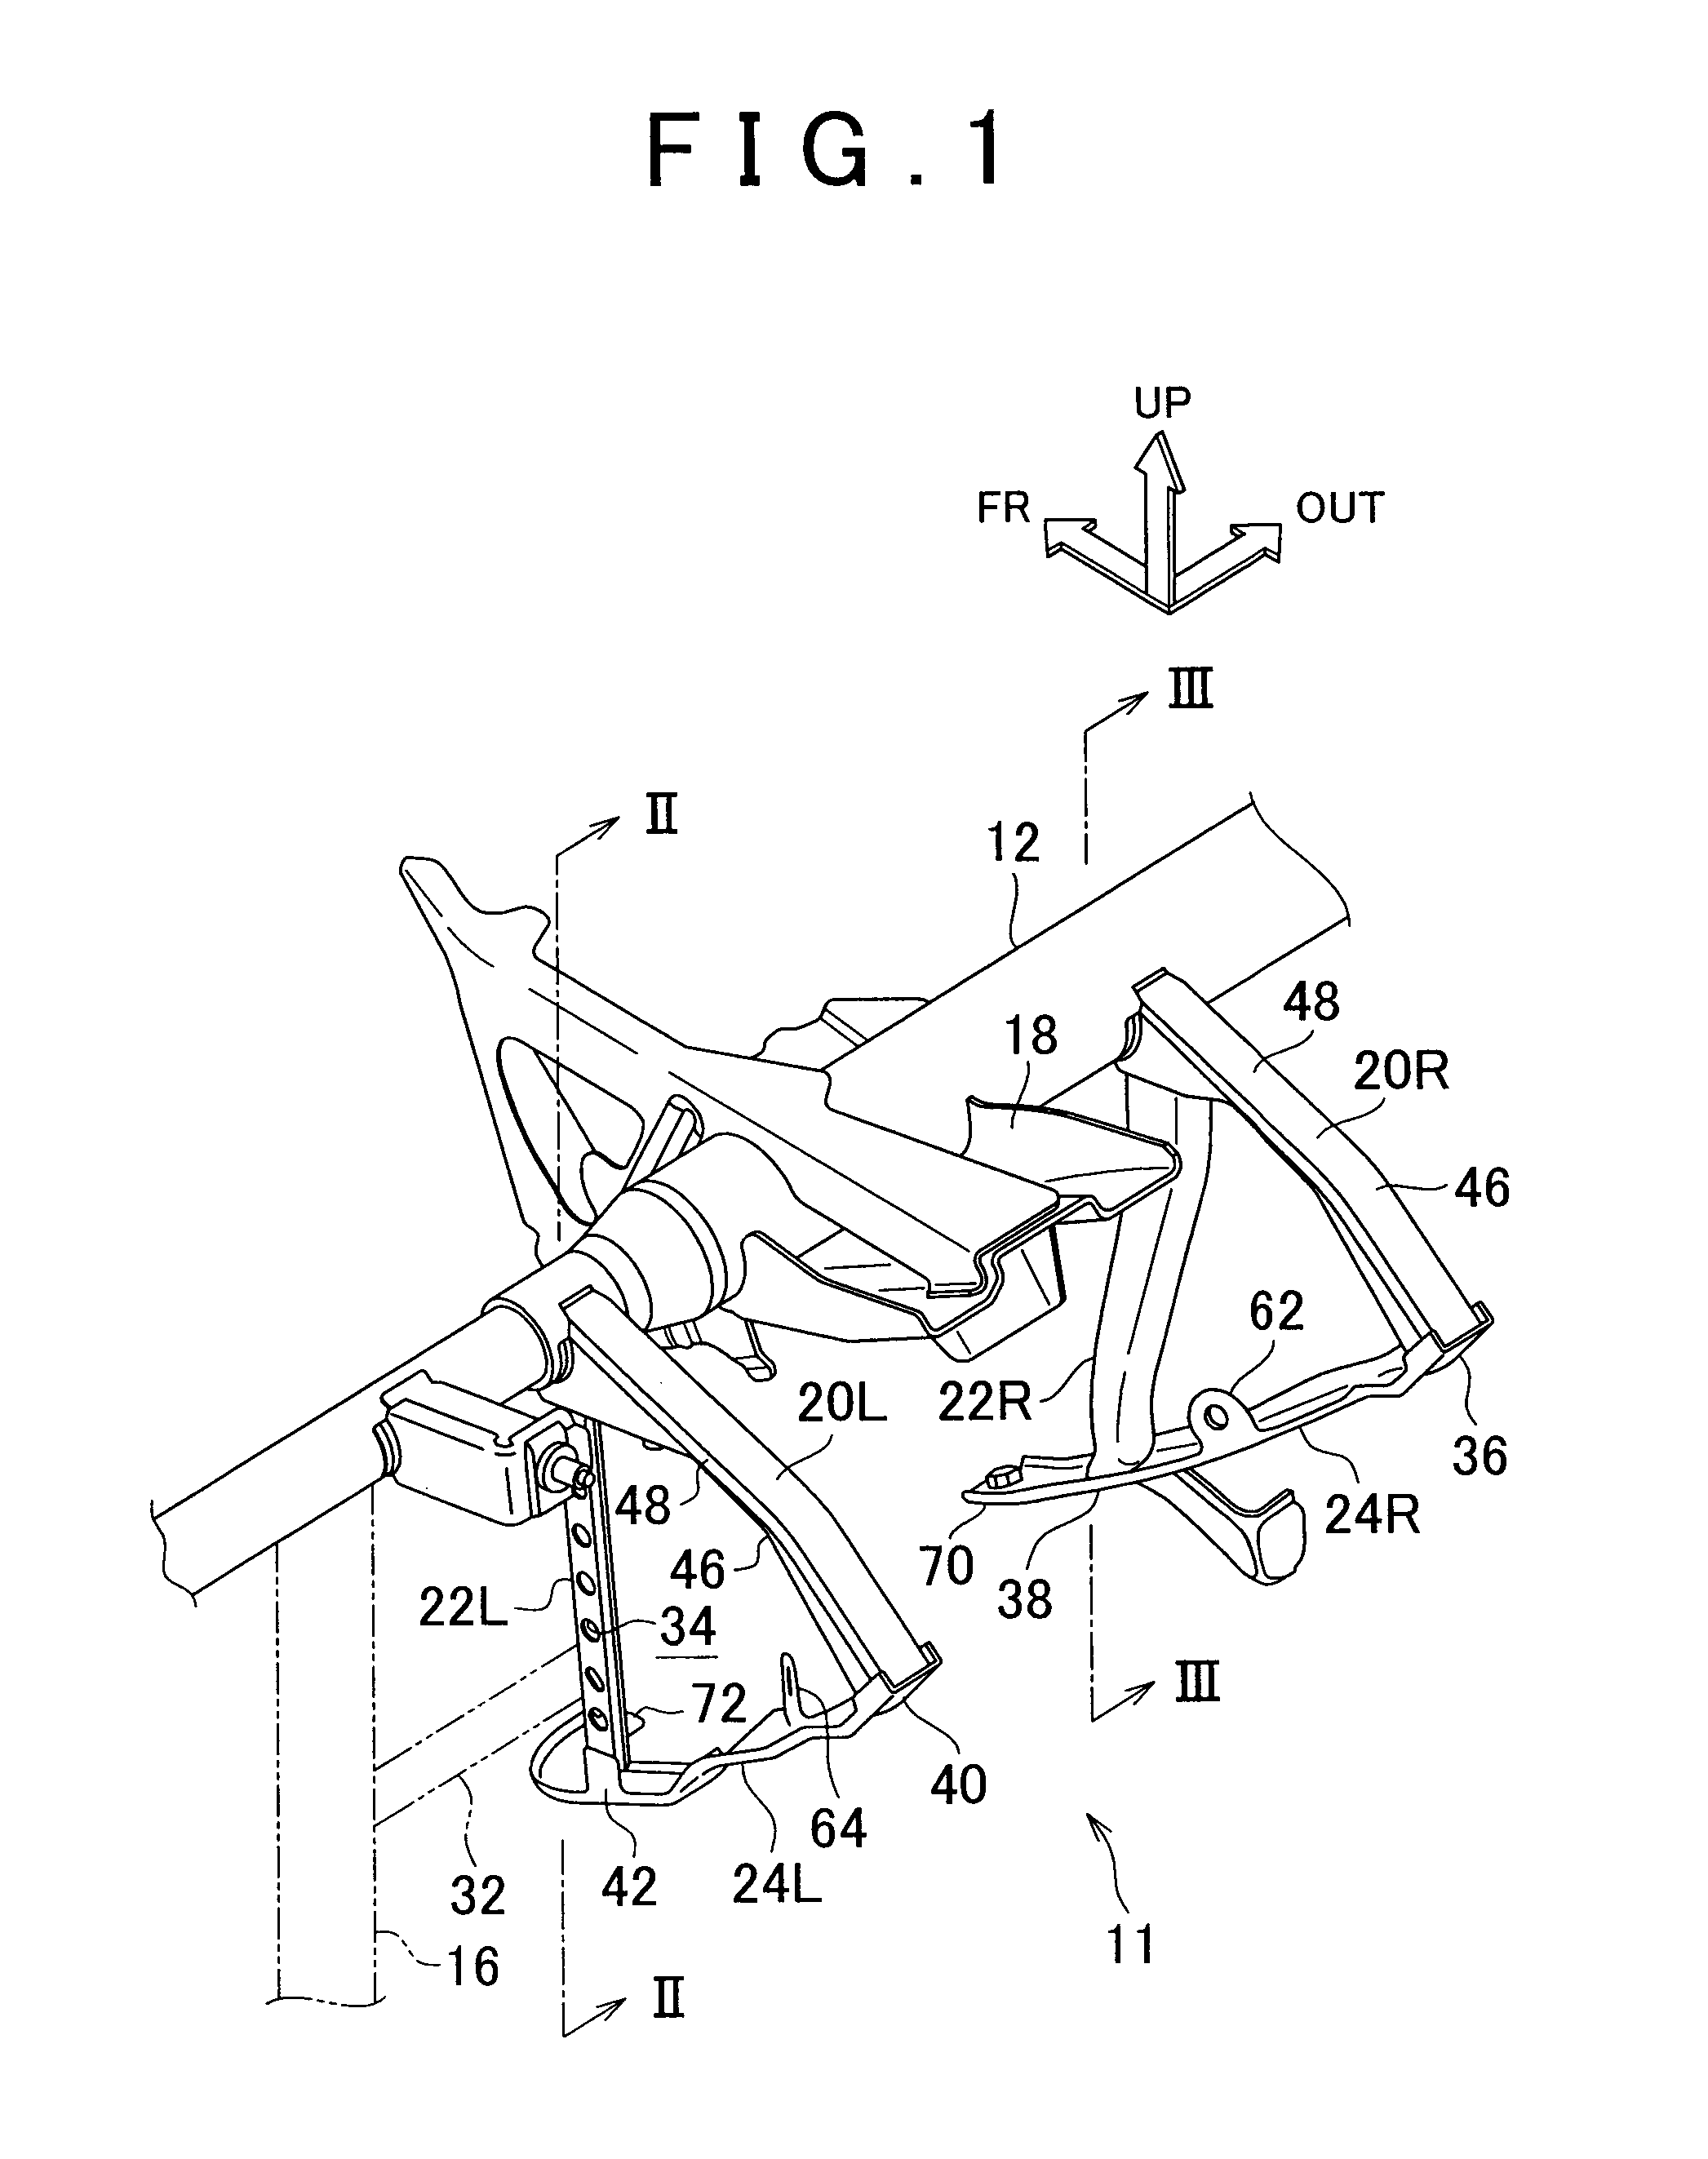 Rearward pedal movement restraint assembly for vehicle